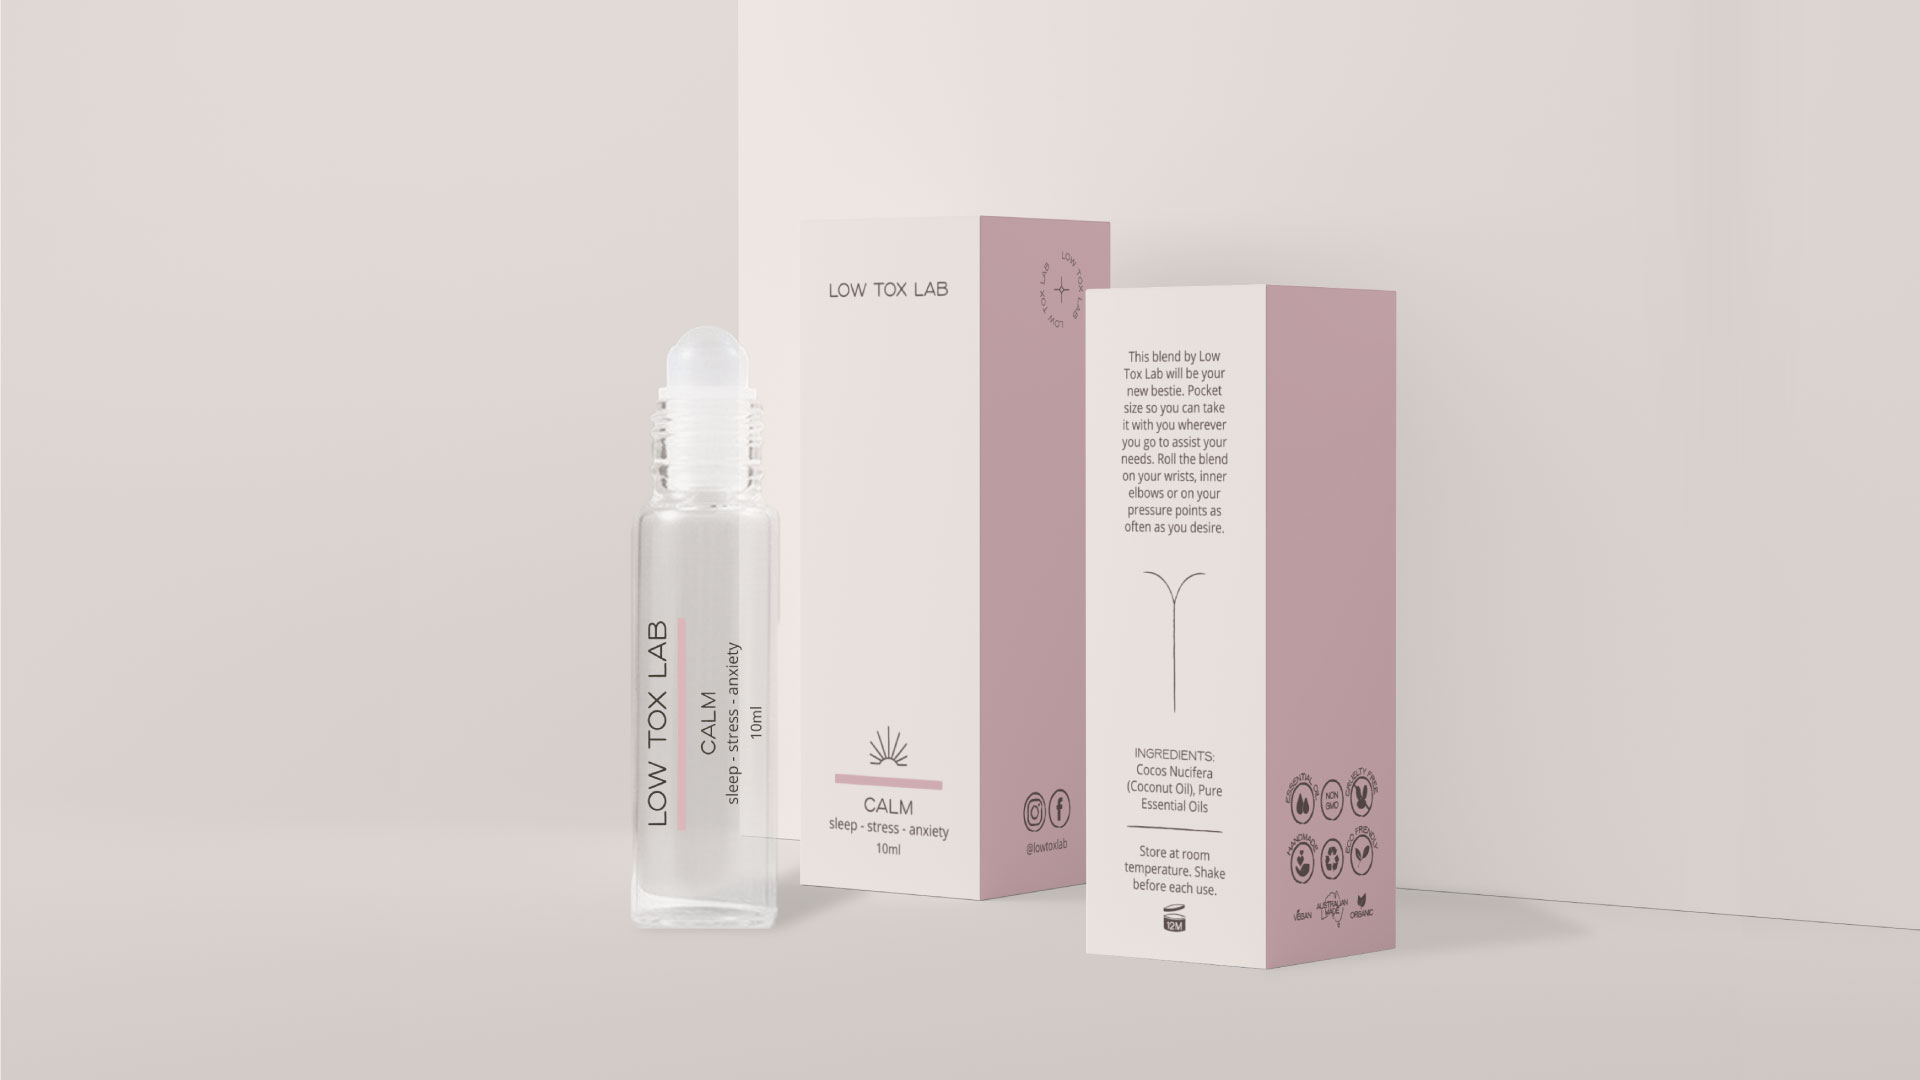 low tox lab branding, packaging design by NP Creative